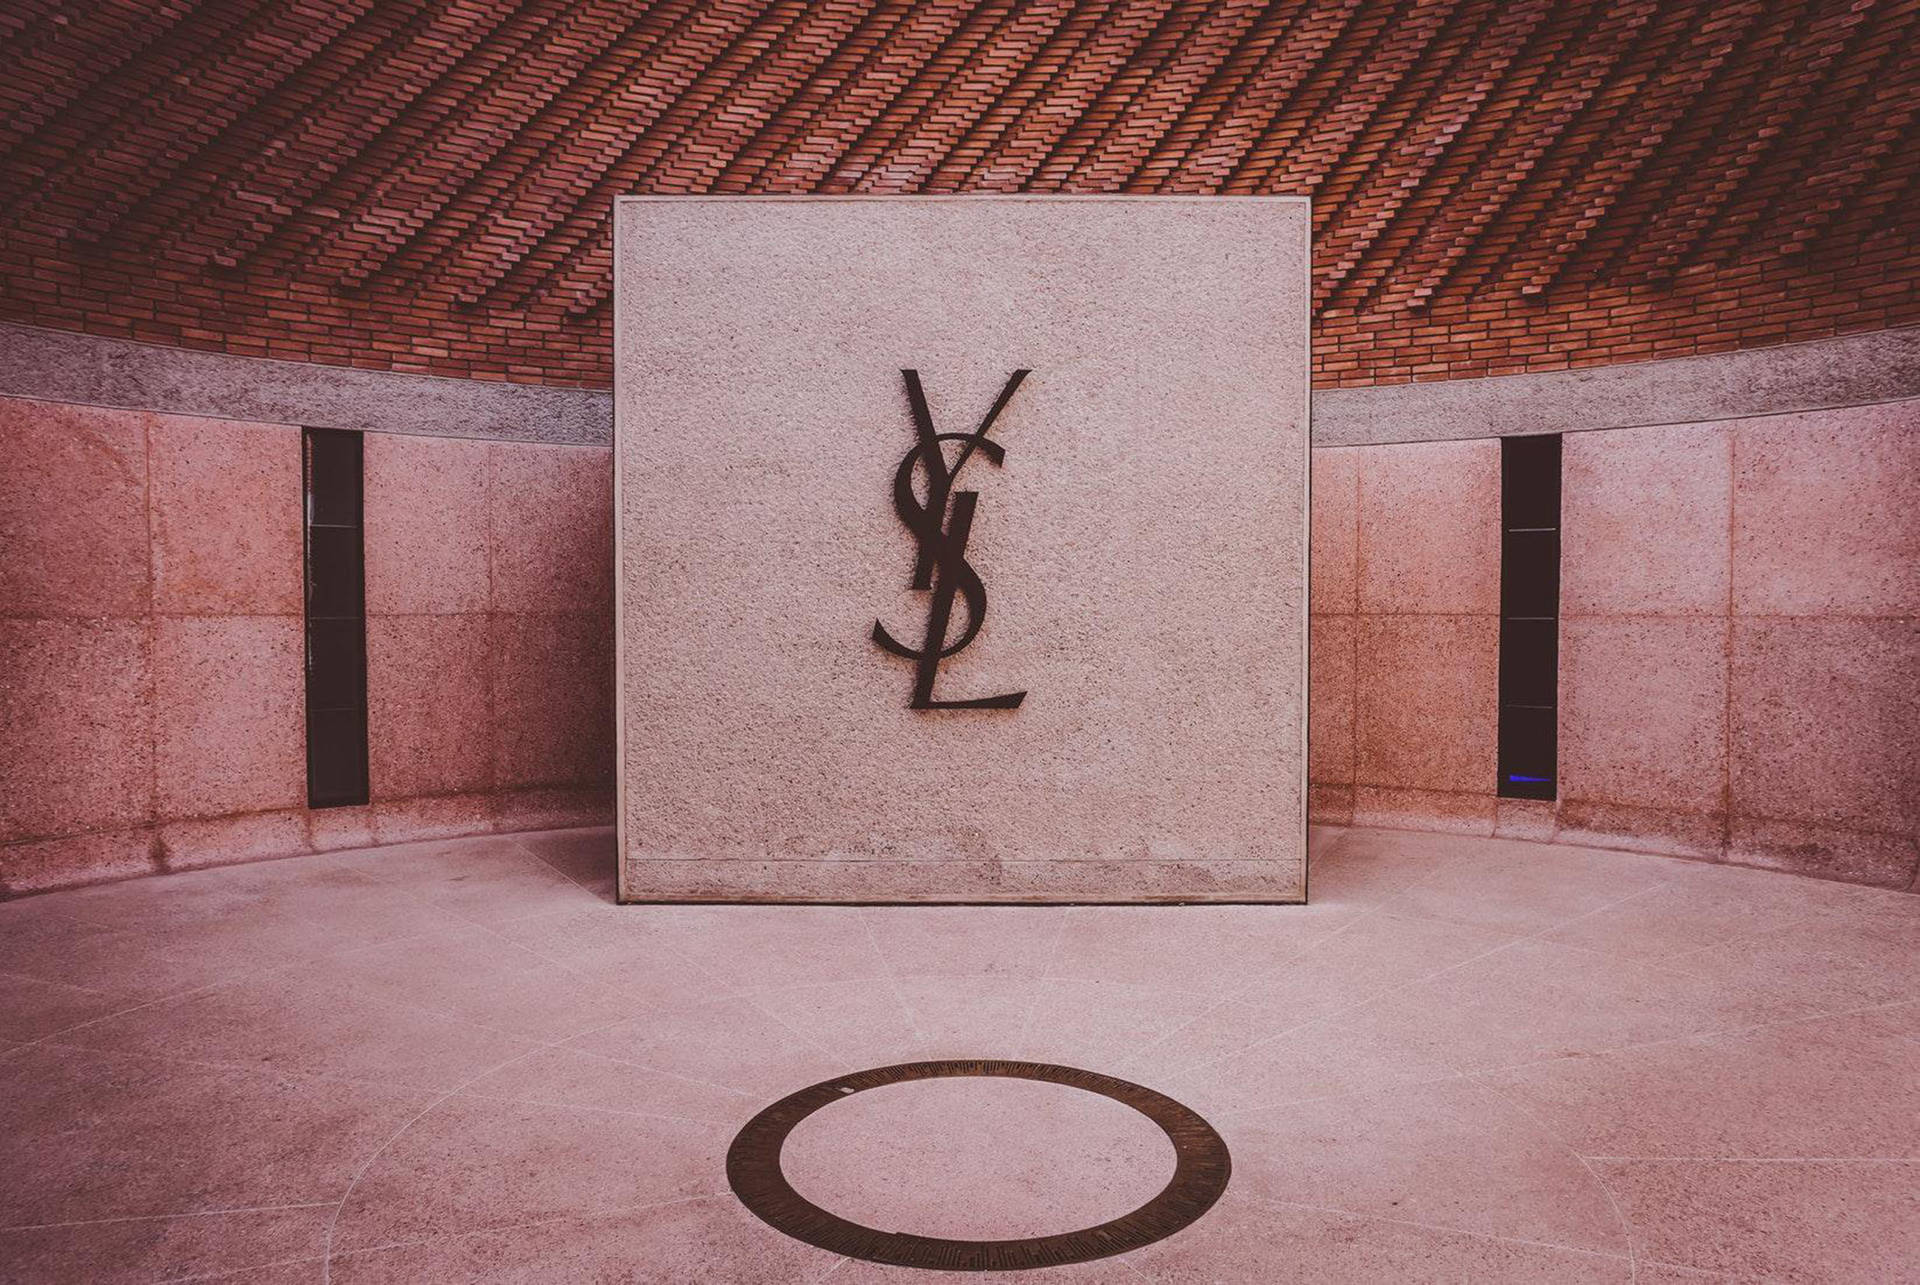 Ysl Museum Logo In Morocco Background